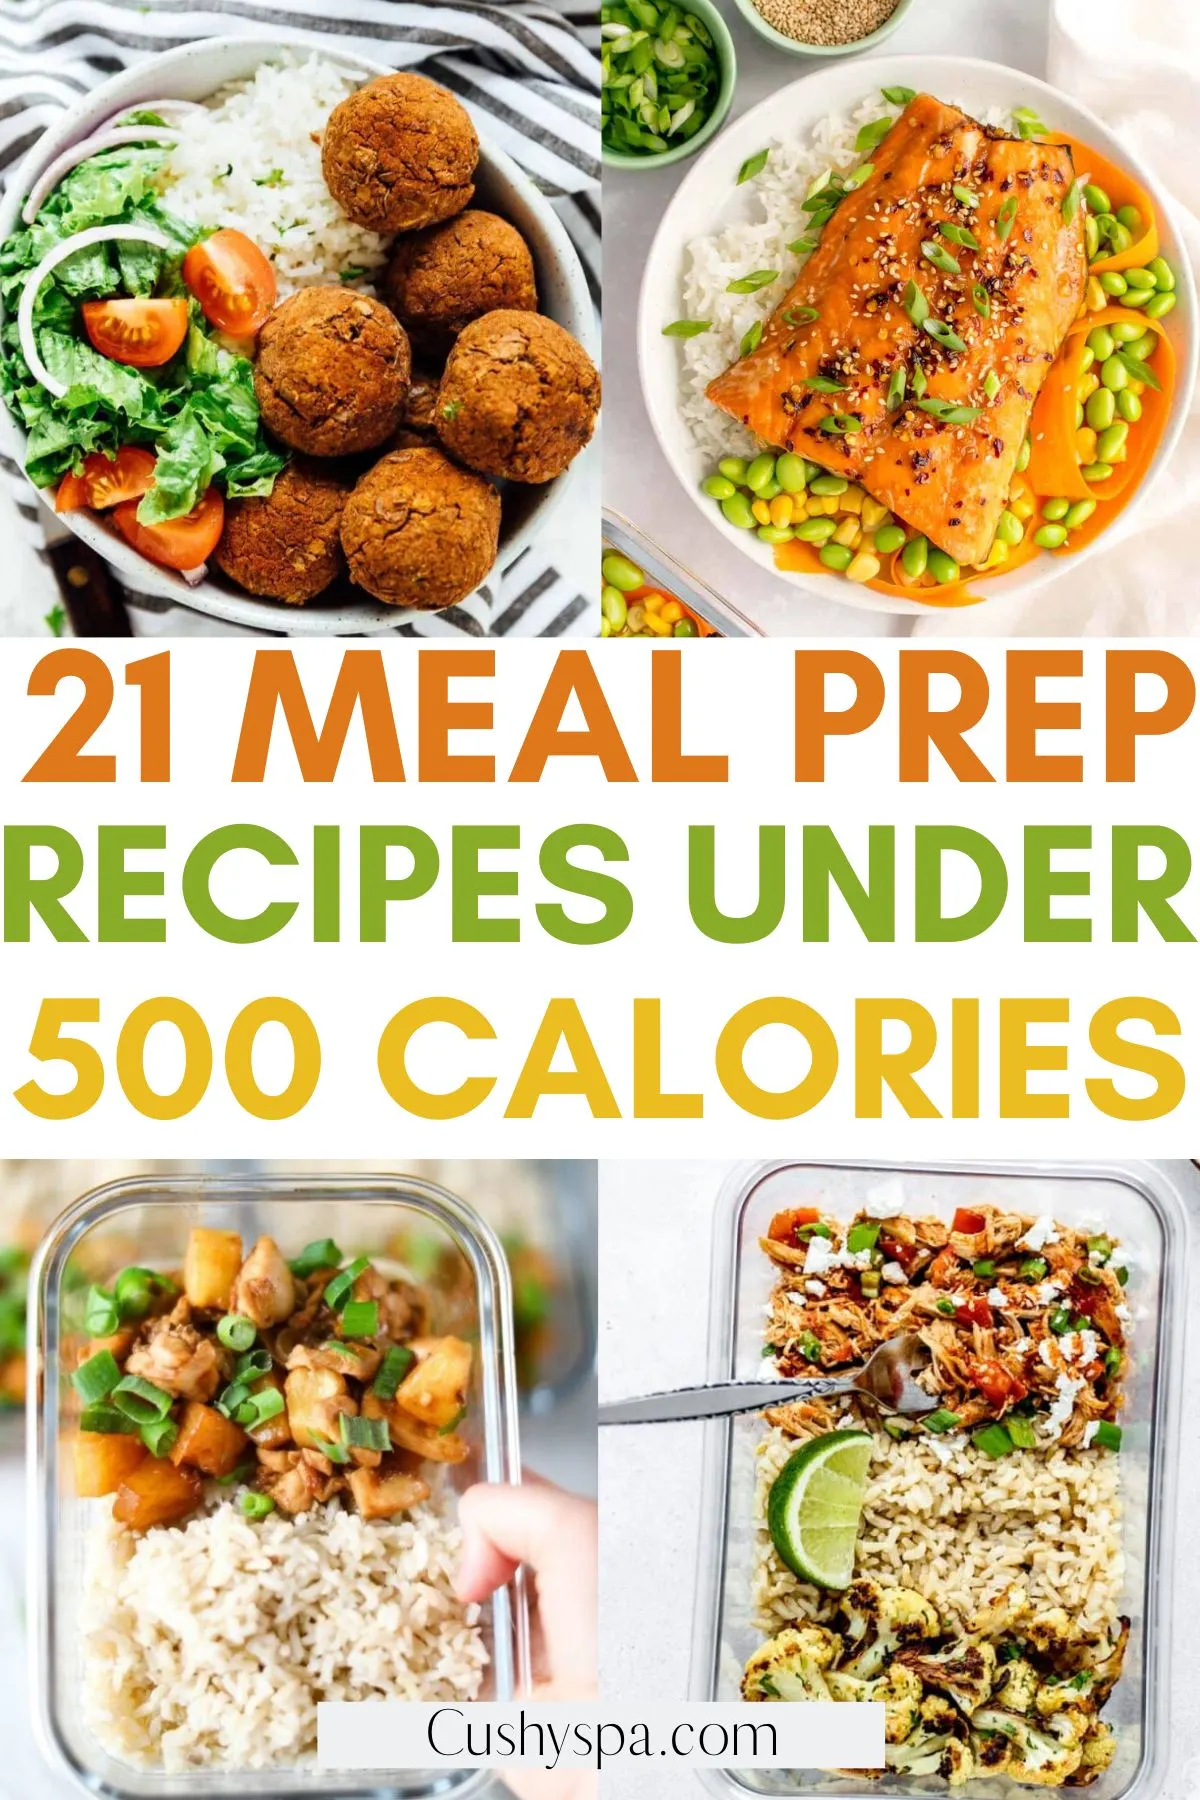 Low-Calorie Meal Prep  18 Tasty Lunch Recipes Under 500 Calories